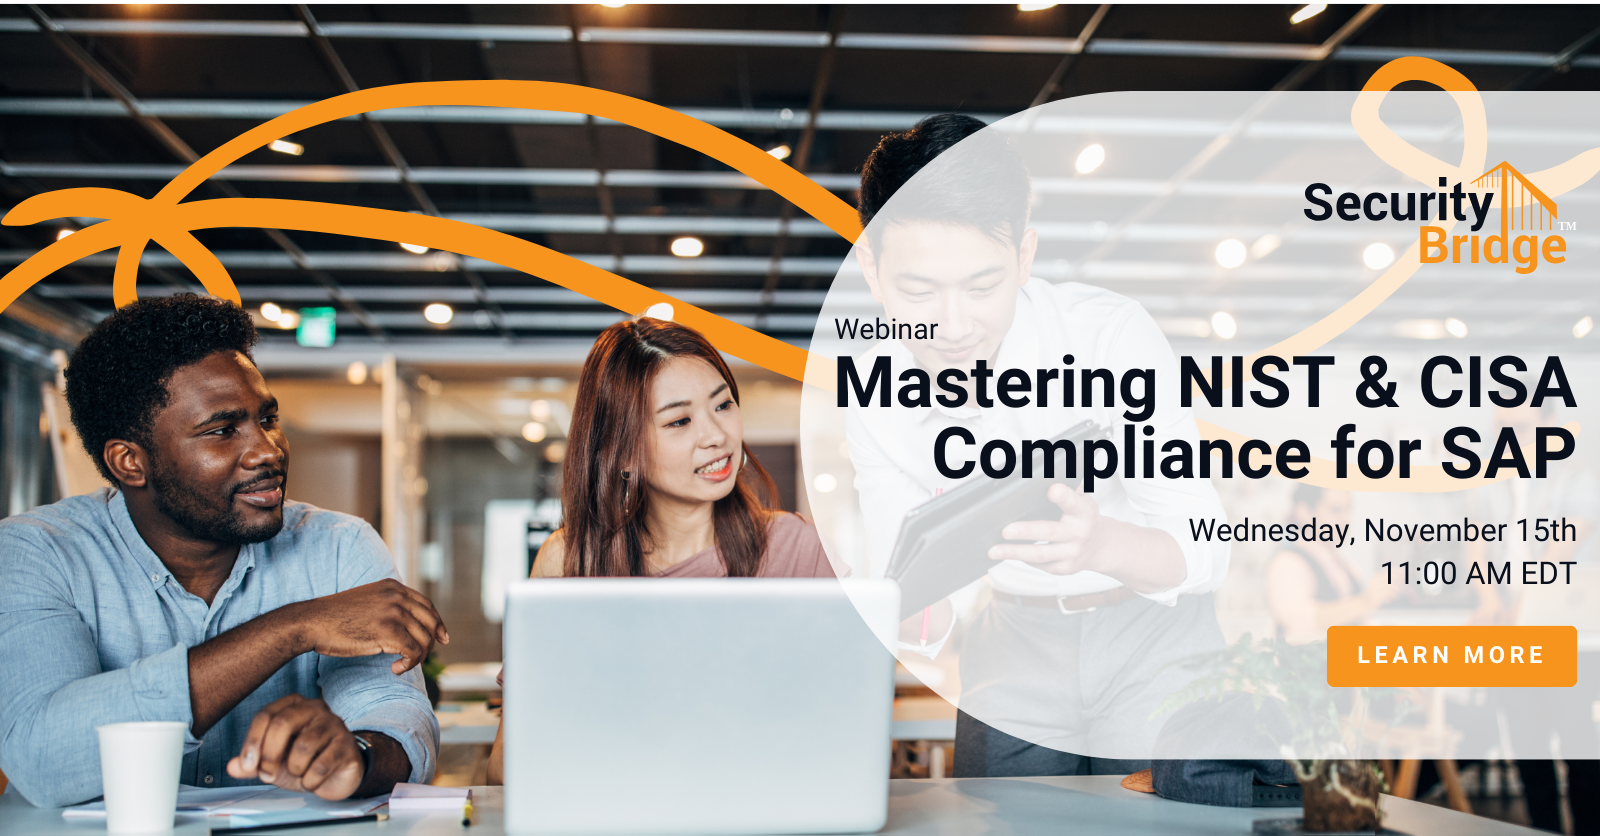 Mastering NIST & CISA Compliance for SAP